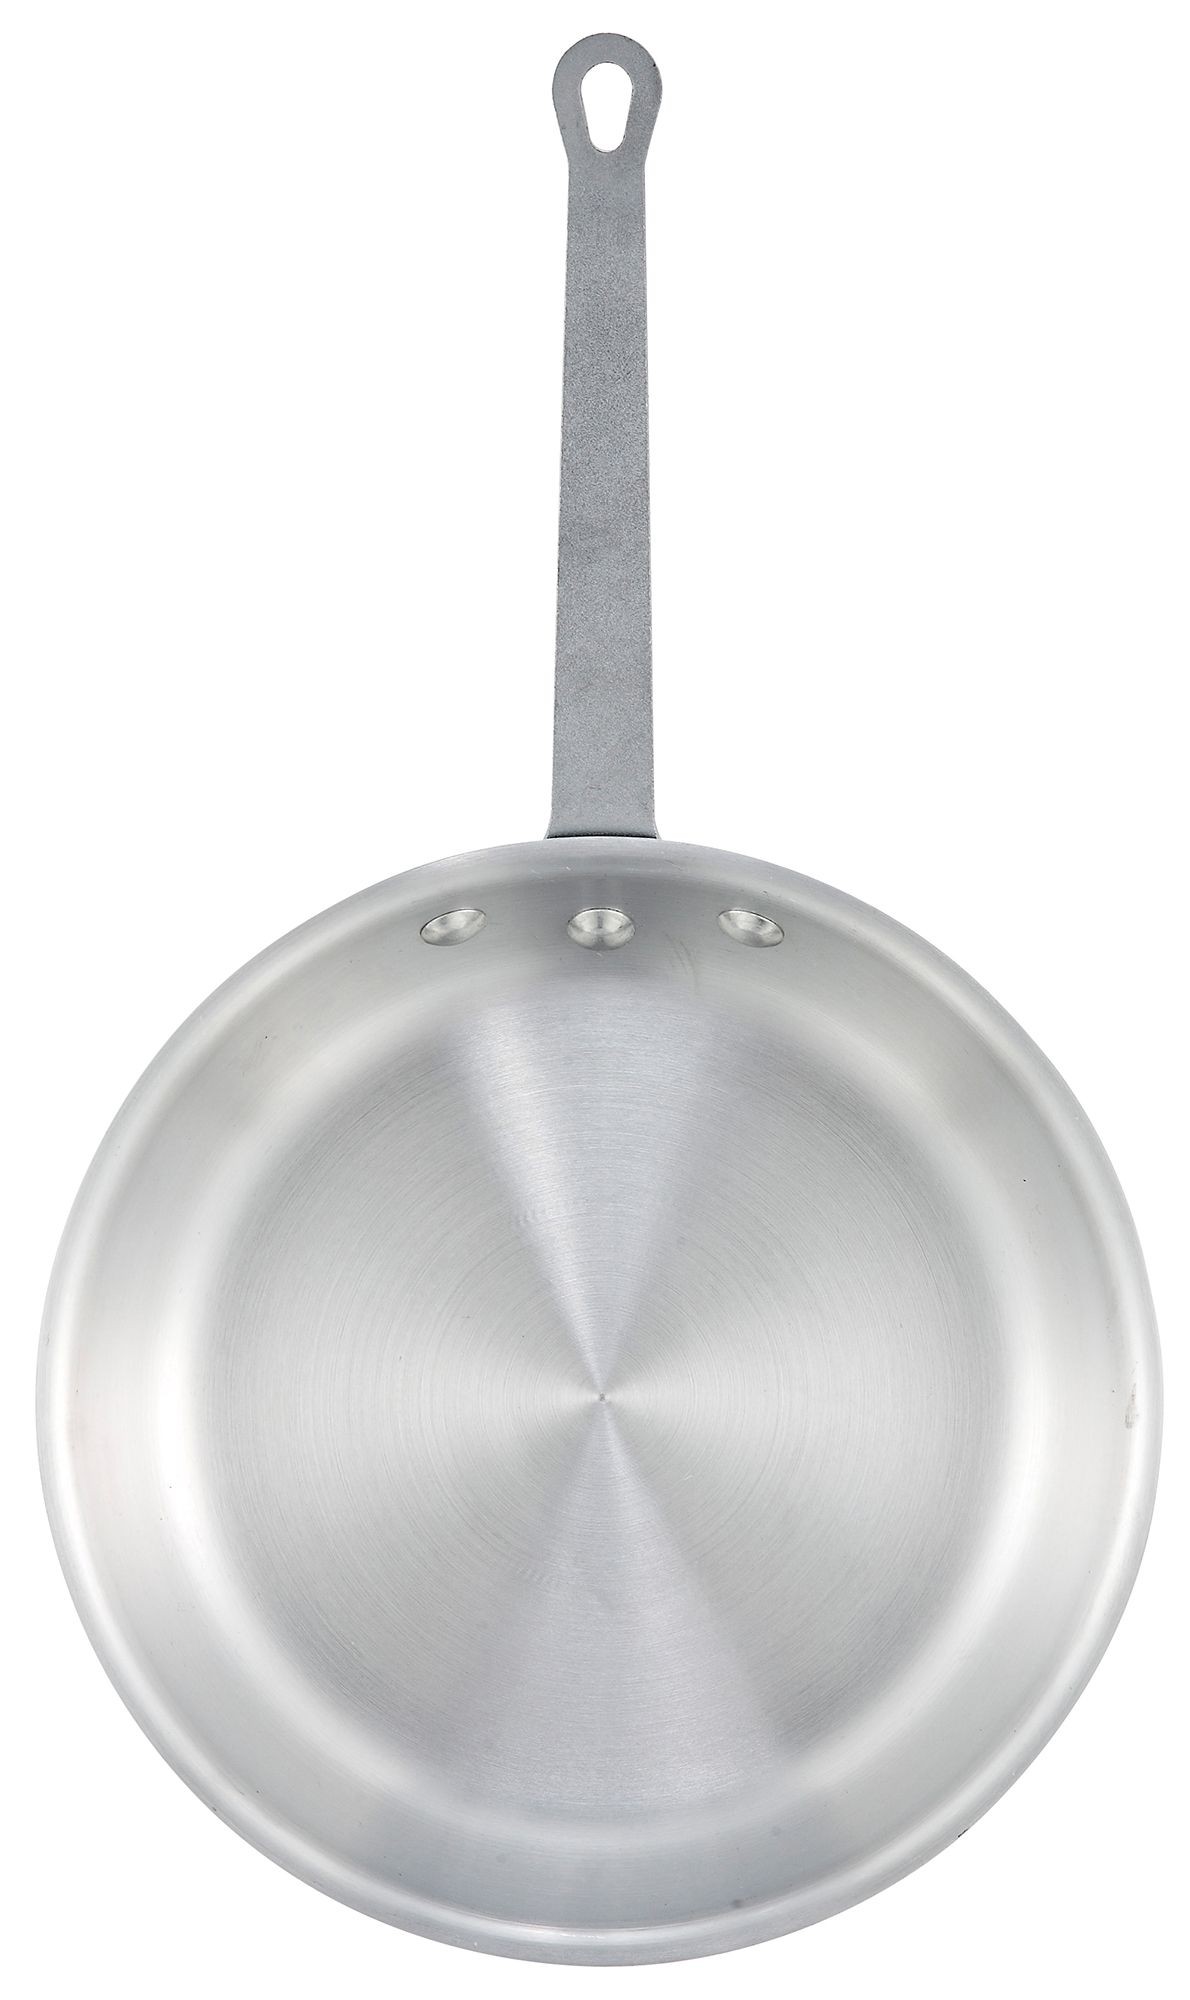 Winco AFP-10A 10" Gladiator Aluminum Fry Pan with Natural Finish